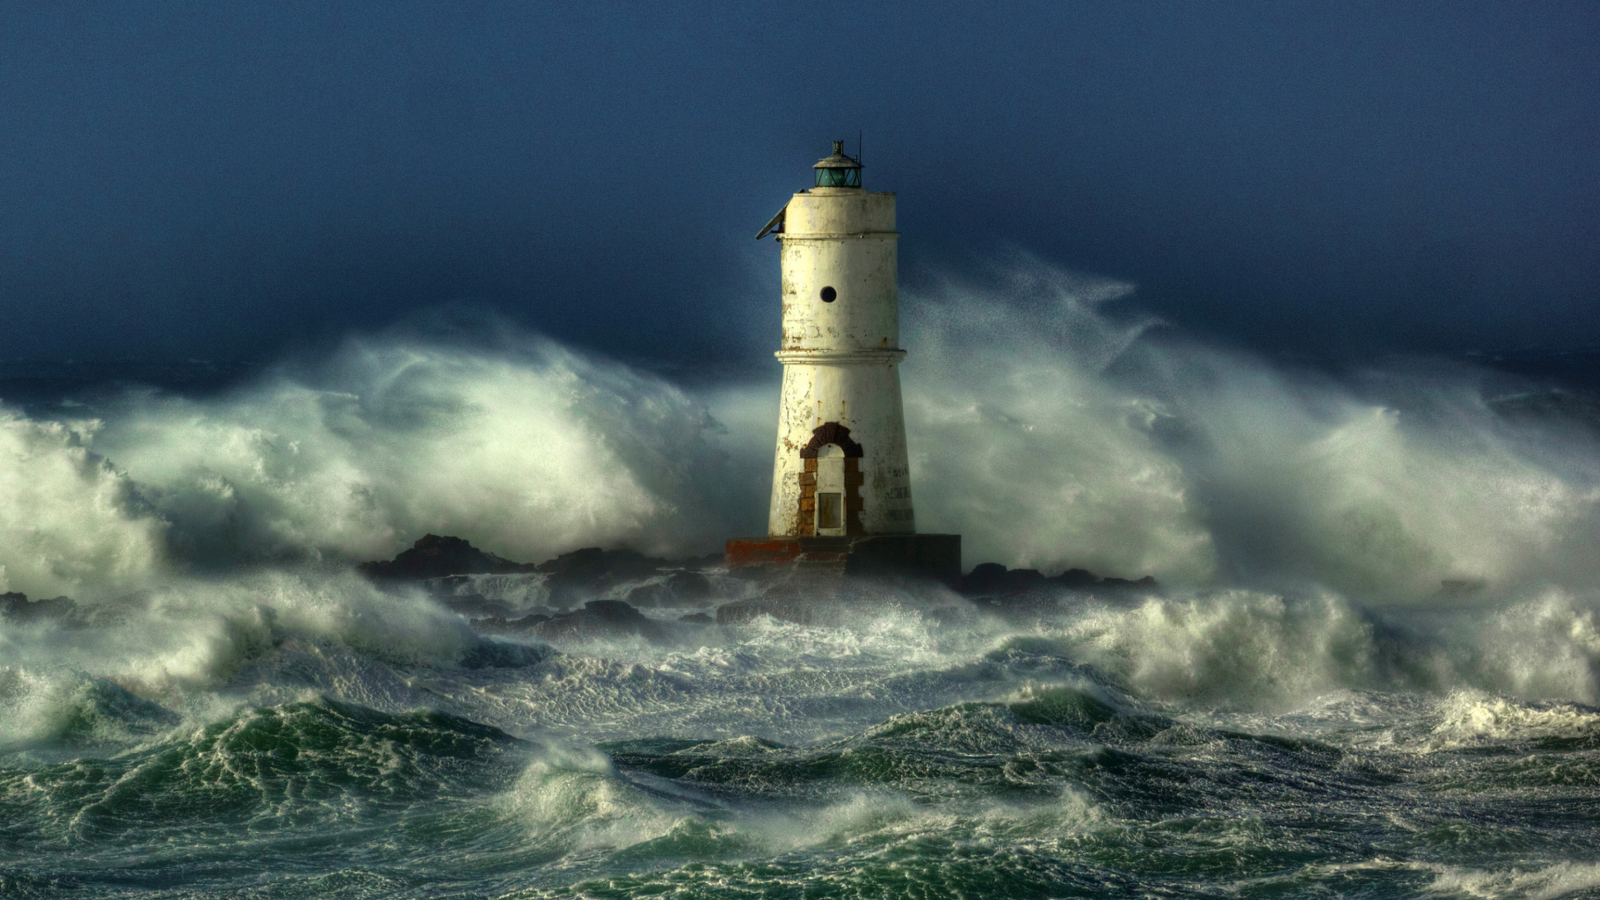 Ocean Storm And Lonely Lighthouse wallpaper 1600x900